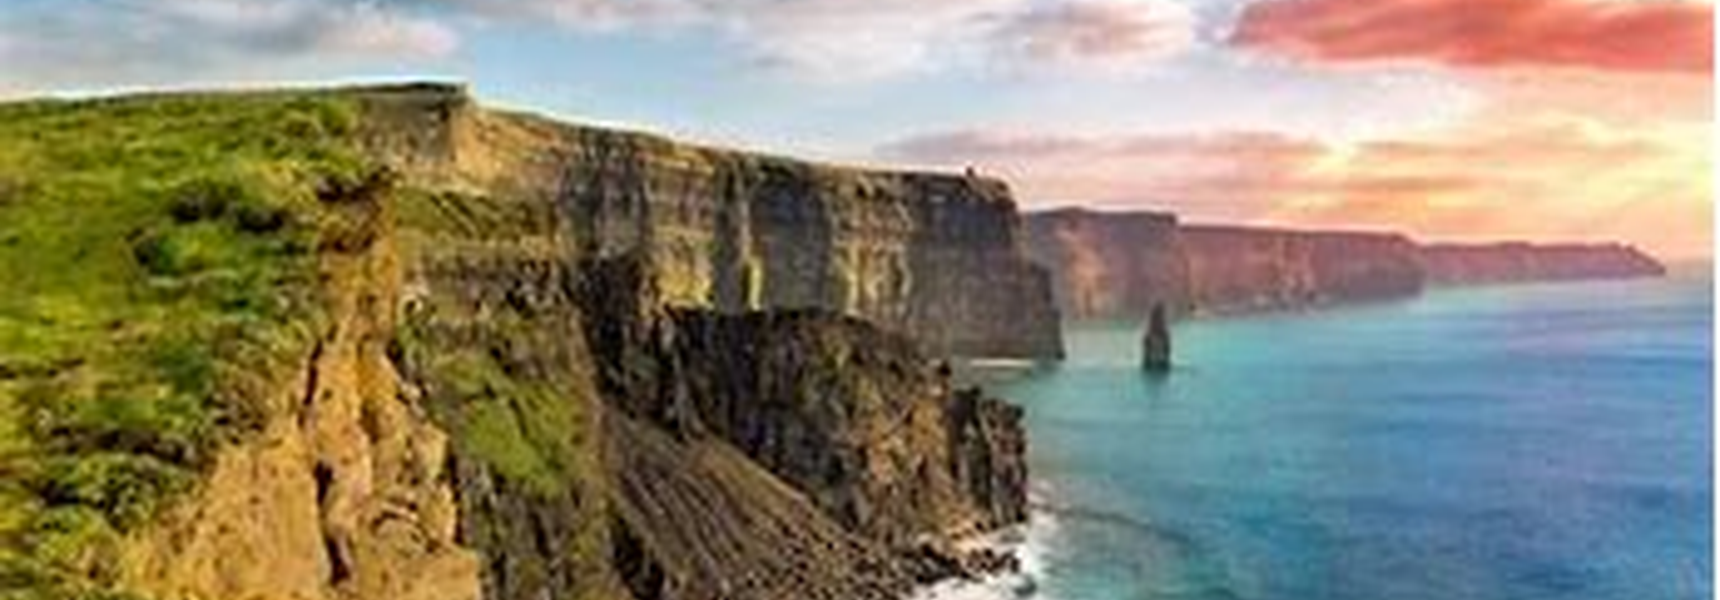 Have you ever heard of the Cliffs of Moher?